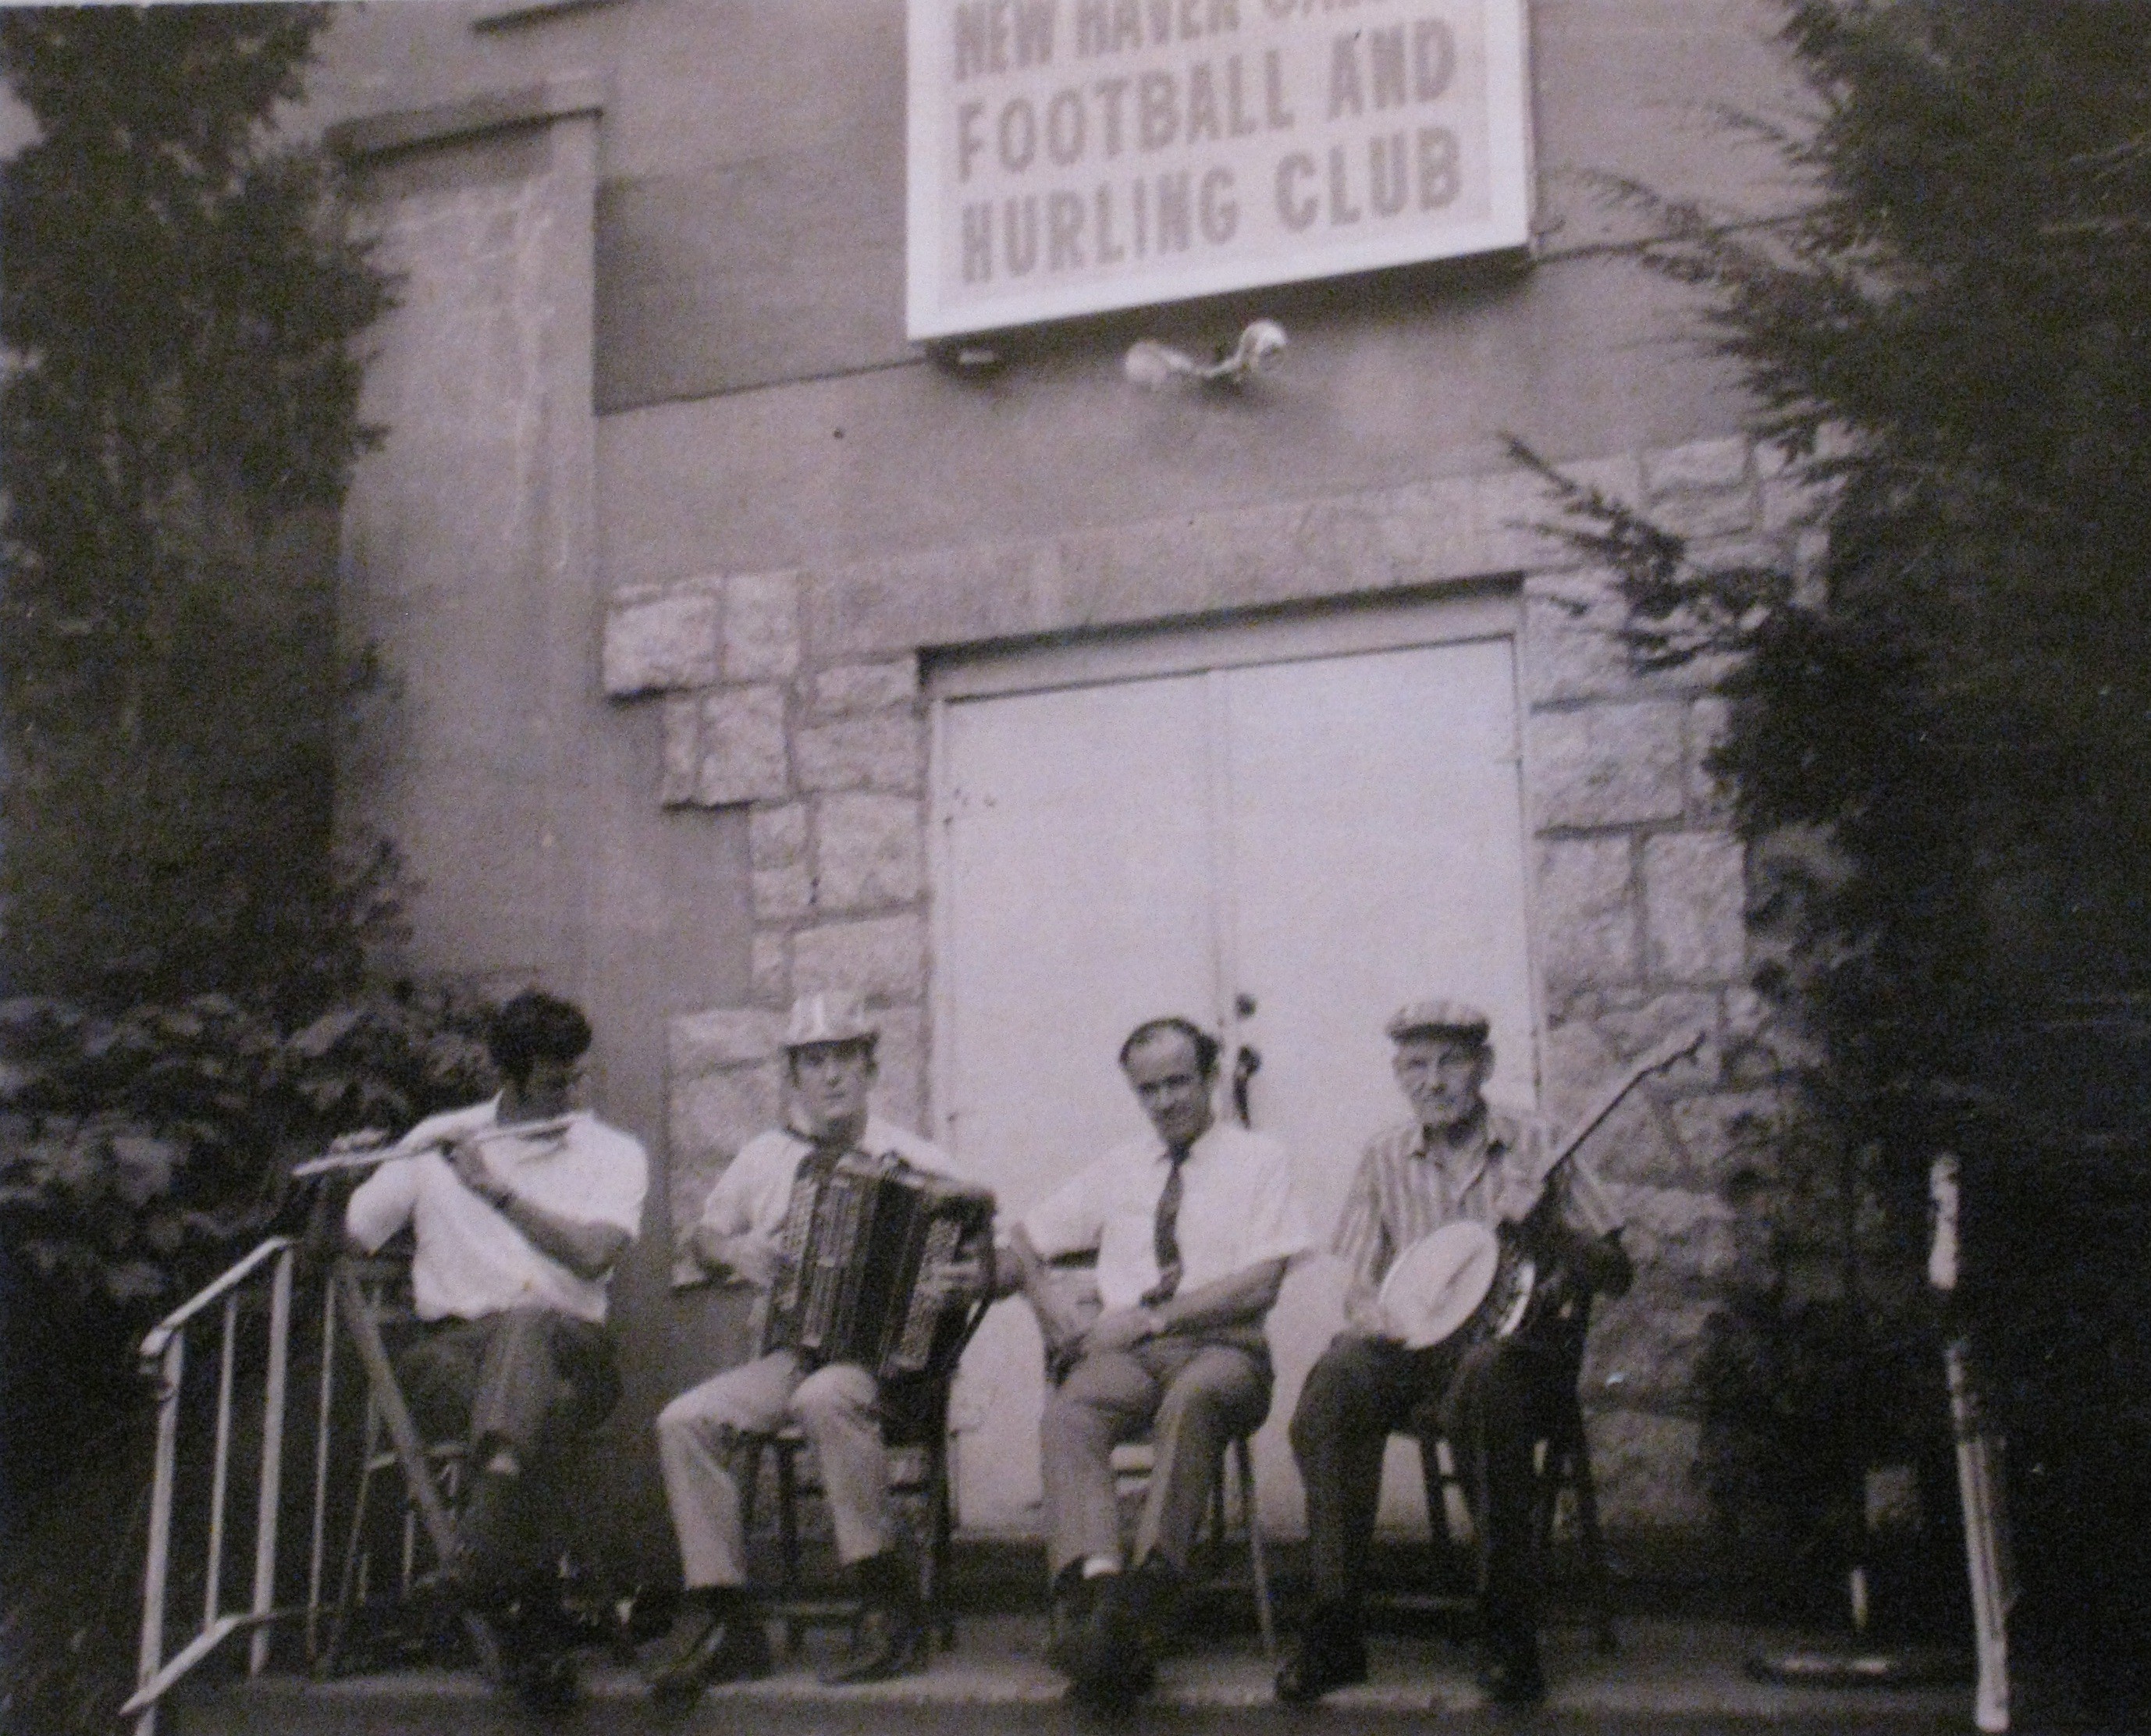 Illustrating the link between the GAA and Irish music and culture, a group of traditional musicians playing a session on the front steps of New Haven Gaelic Football and Hurling Club.